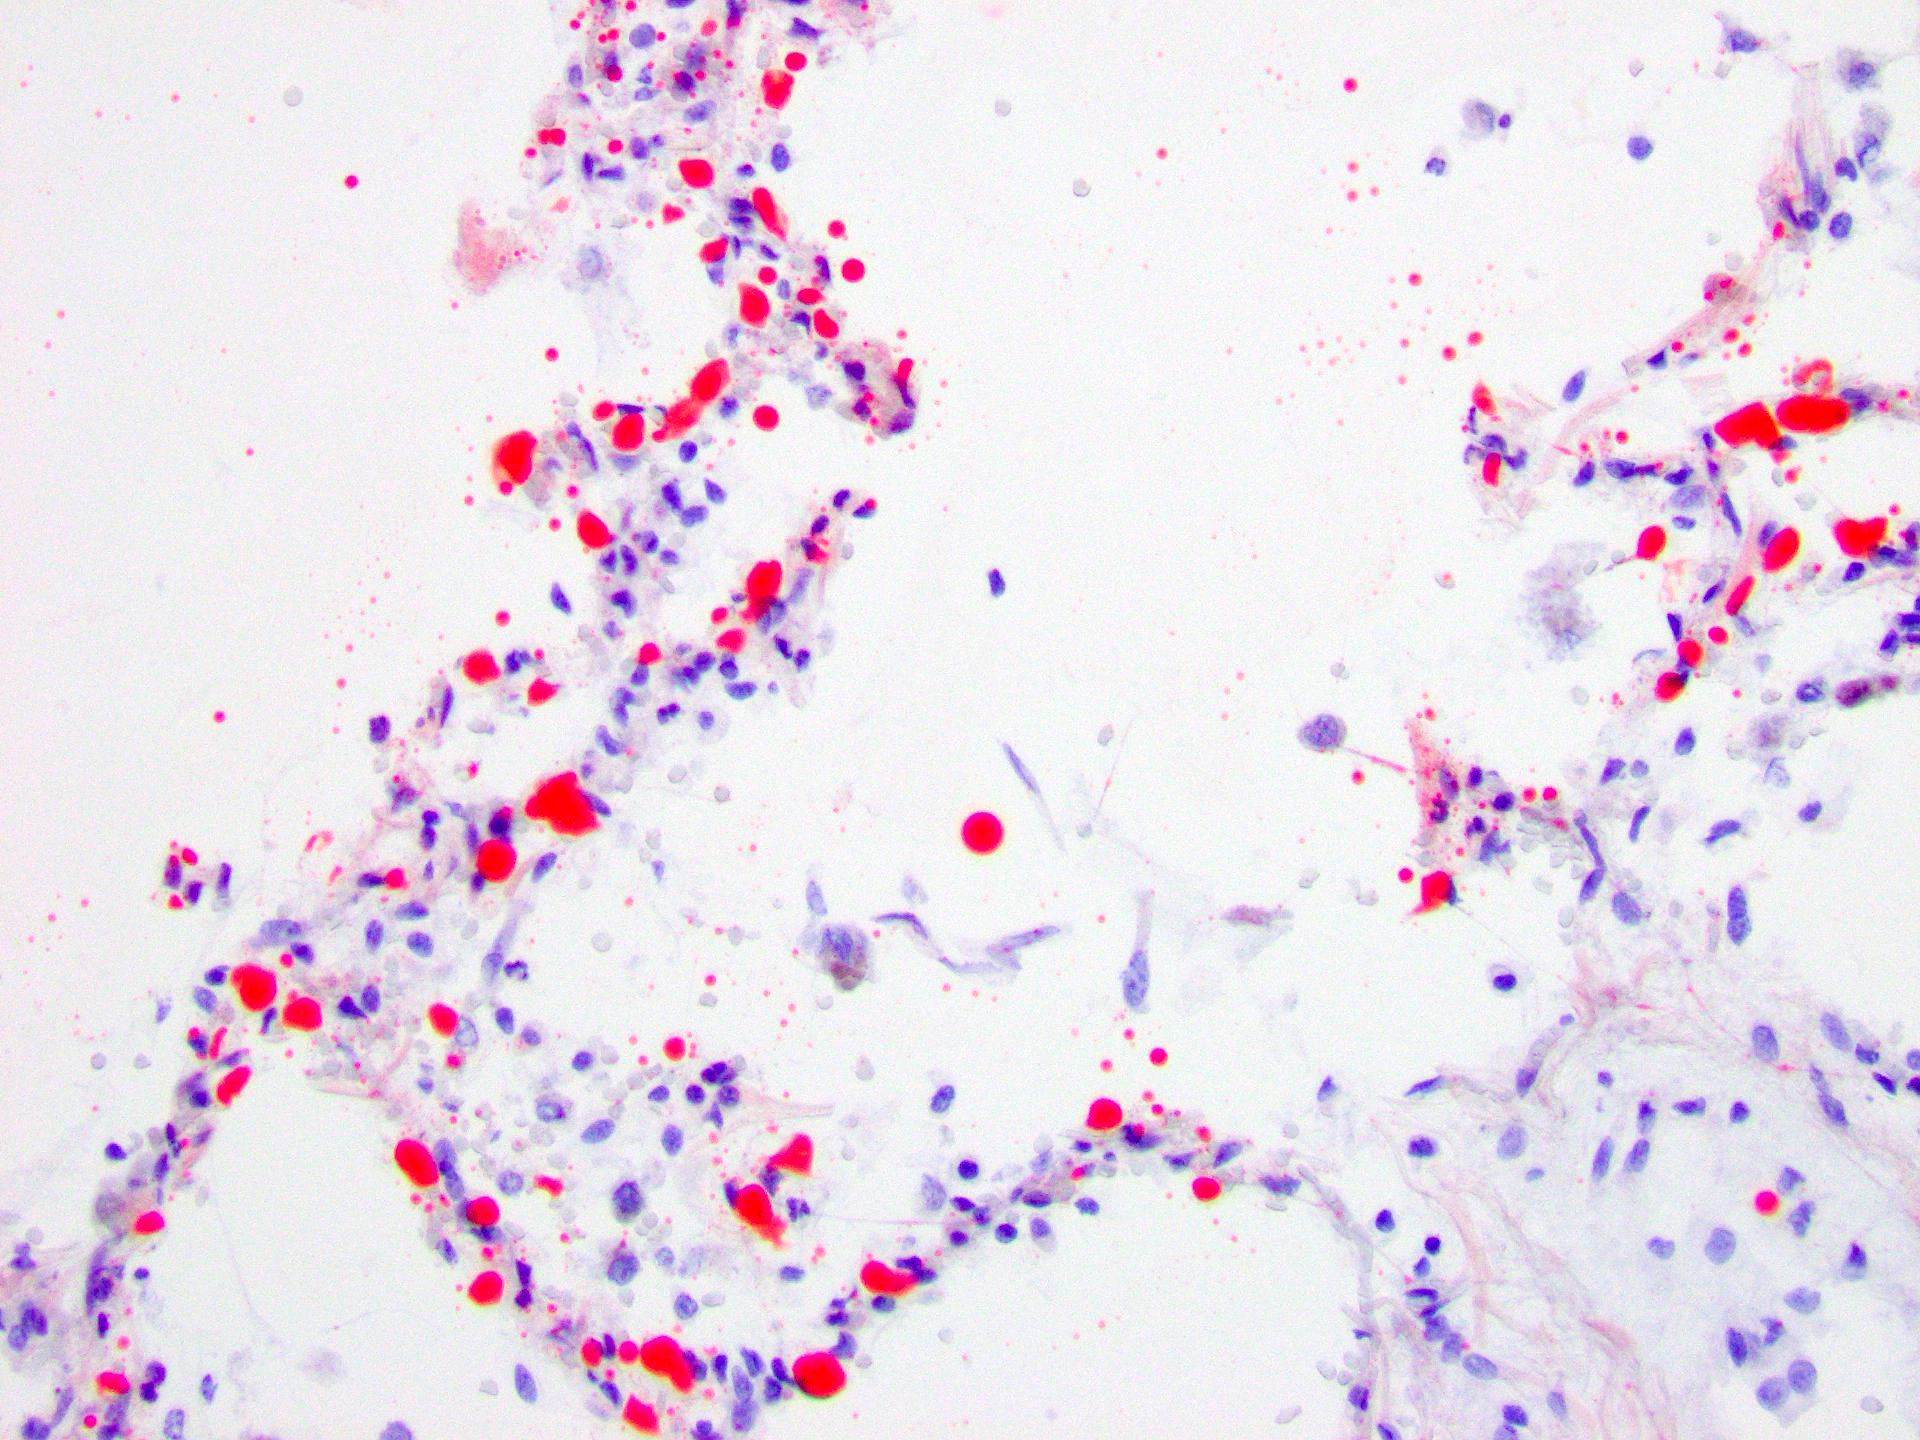 Figure 4: Diffusely positive staining of the globular empty spaces in the intra-alveolar capillaries (Oil Red O, 200x).